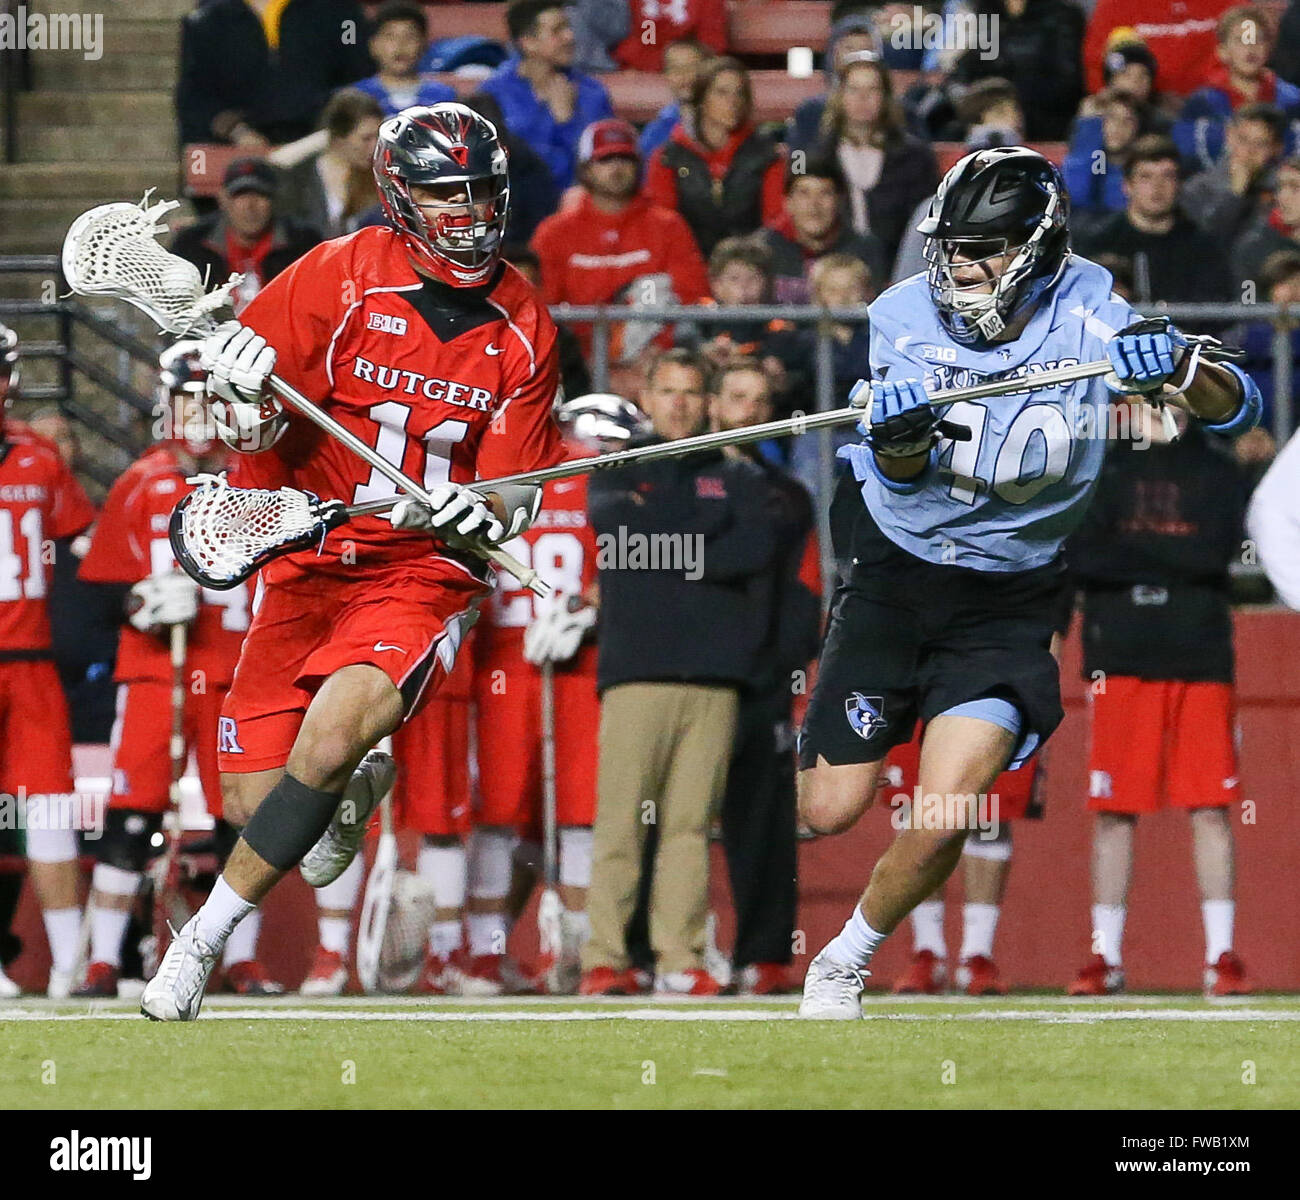 Piscataway, NJ, USA. 2nd Apr, 2016. Austin Spencer (40) tries to defend Jeff George (11) during an NCAA Lacrosse game between the Johns Hopkins Blue Jays and the Rutgers Scarlet Knights at High Point Solutions Stadium in Piscataway, NJ. Rutgers defeated Johns Hopkins 16-9. Mike Langish/Cal Sport Media. © csm/Alamy Live News Stock Photo